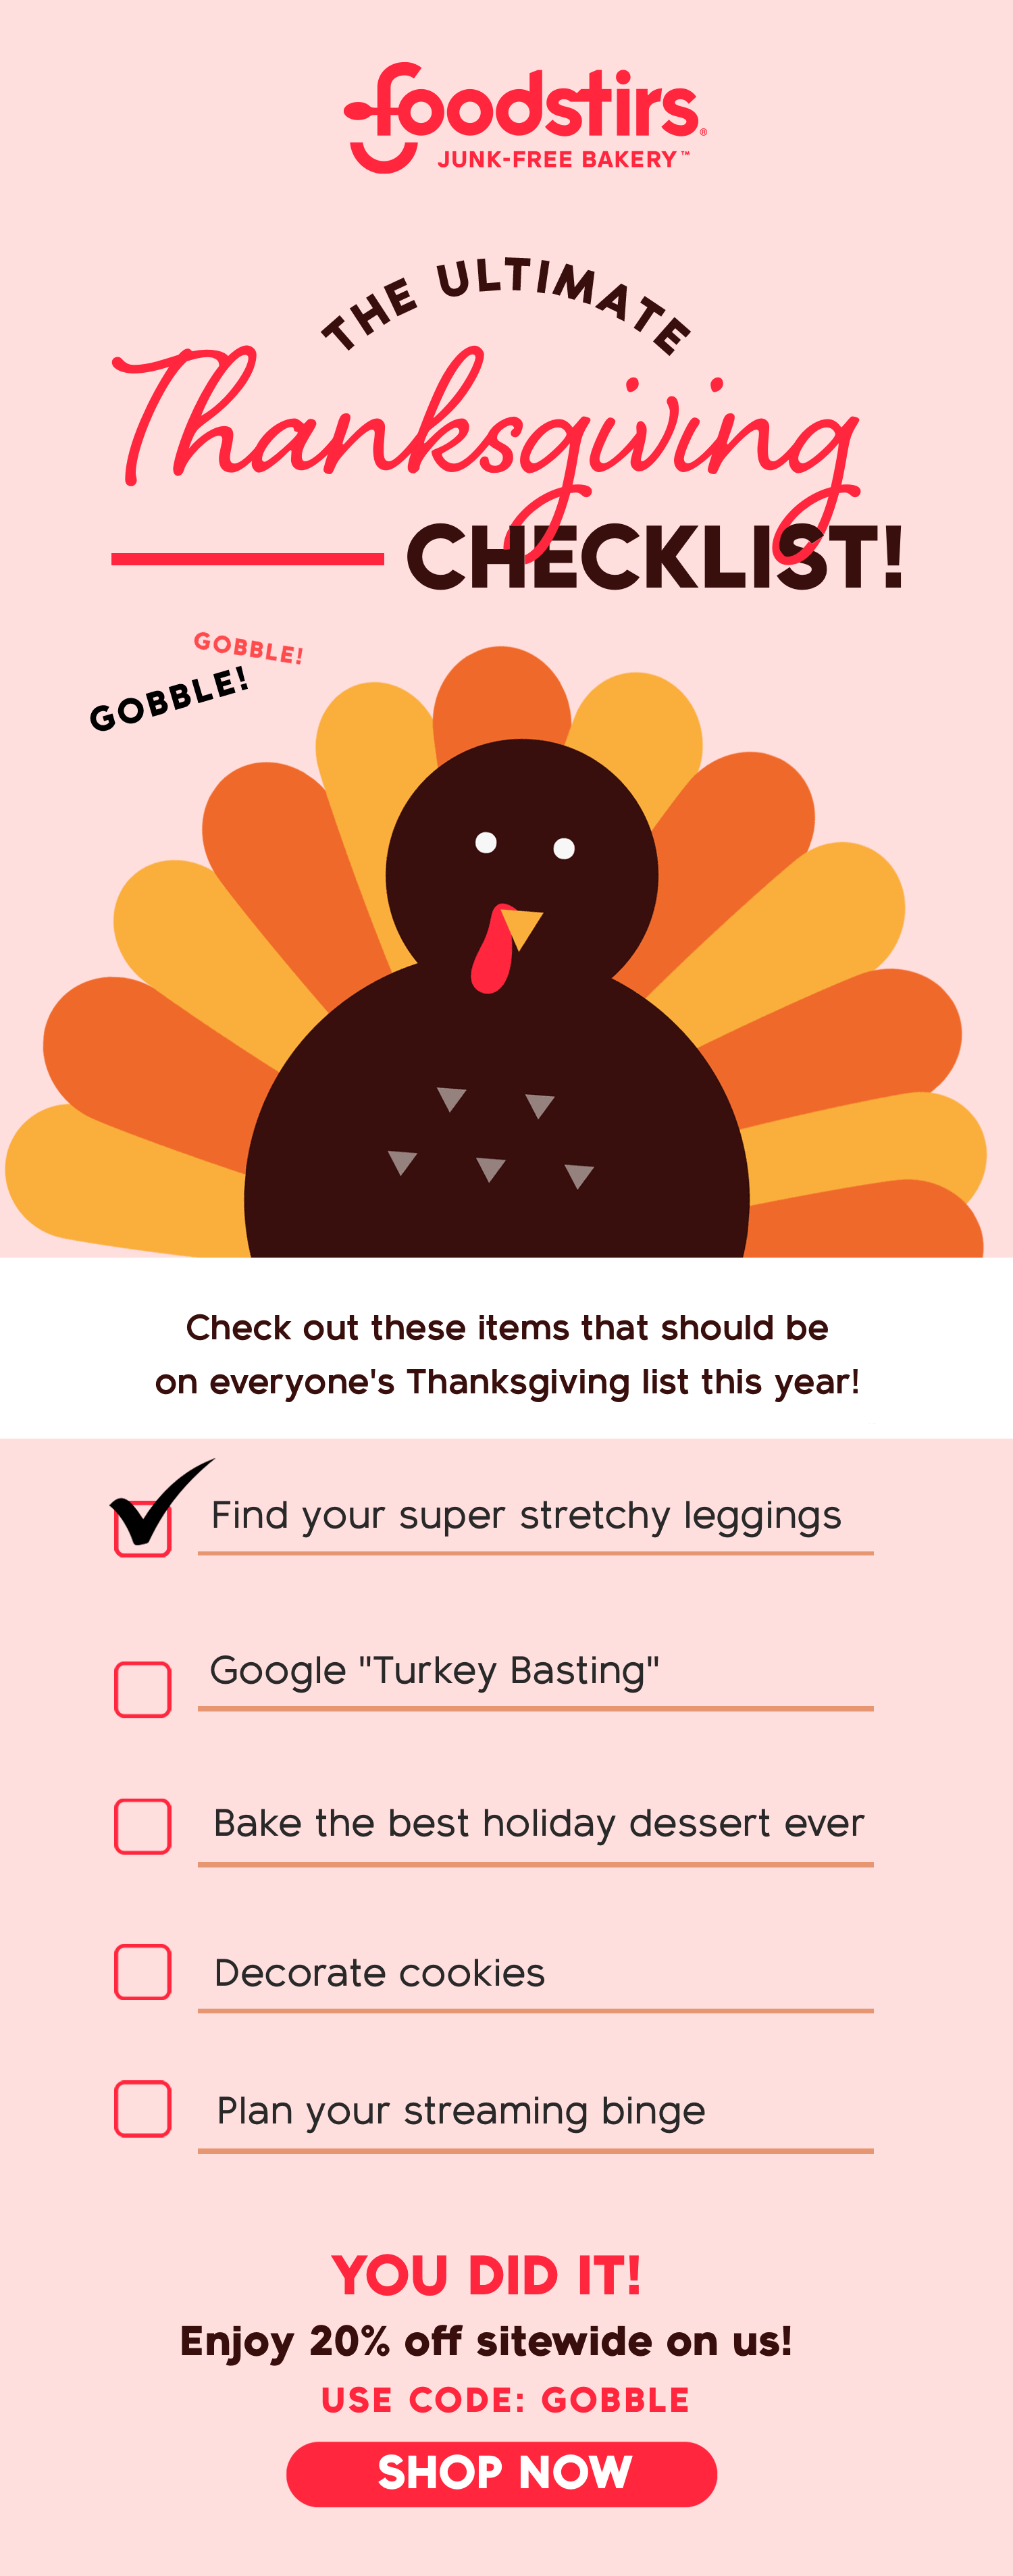 A Thanksgiving email with a GIF of a Turkey and a holiday checklist